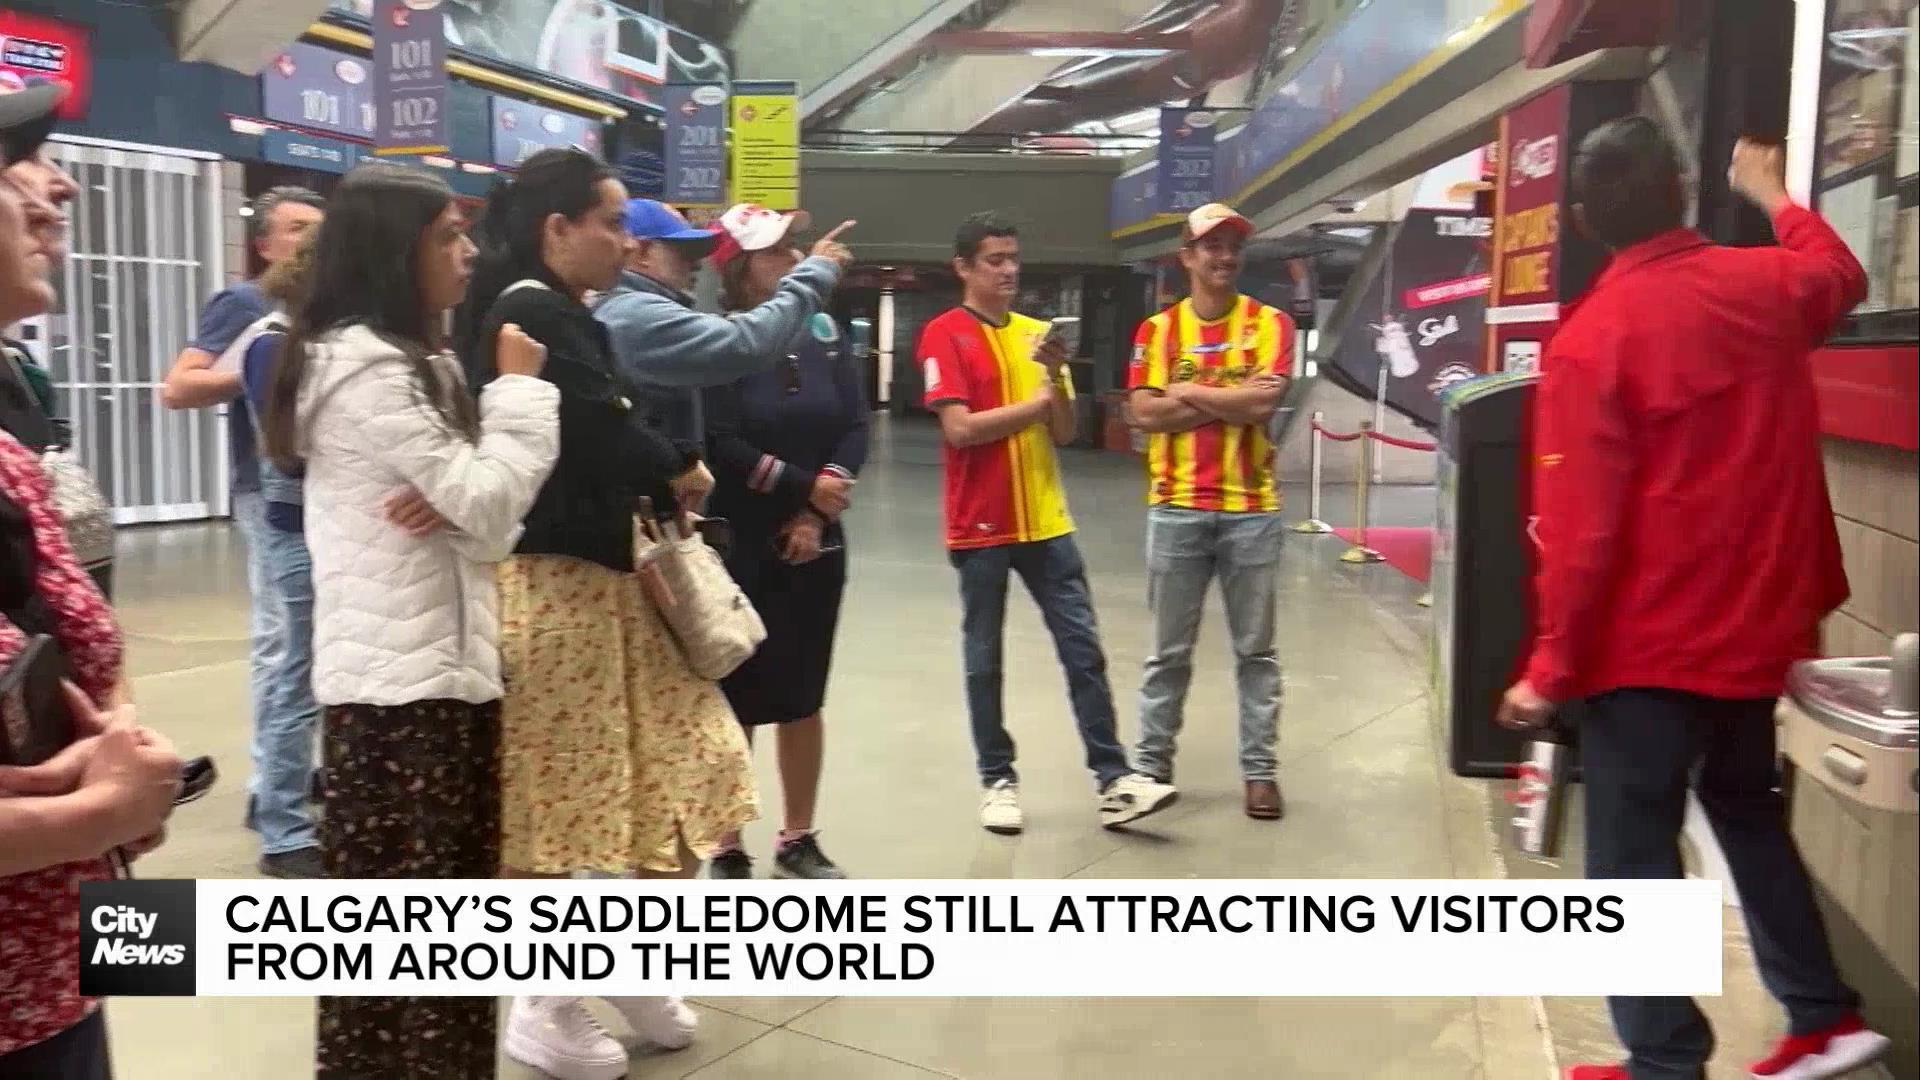 Calgary’s Saddledome still attracting visitors from around the world